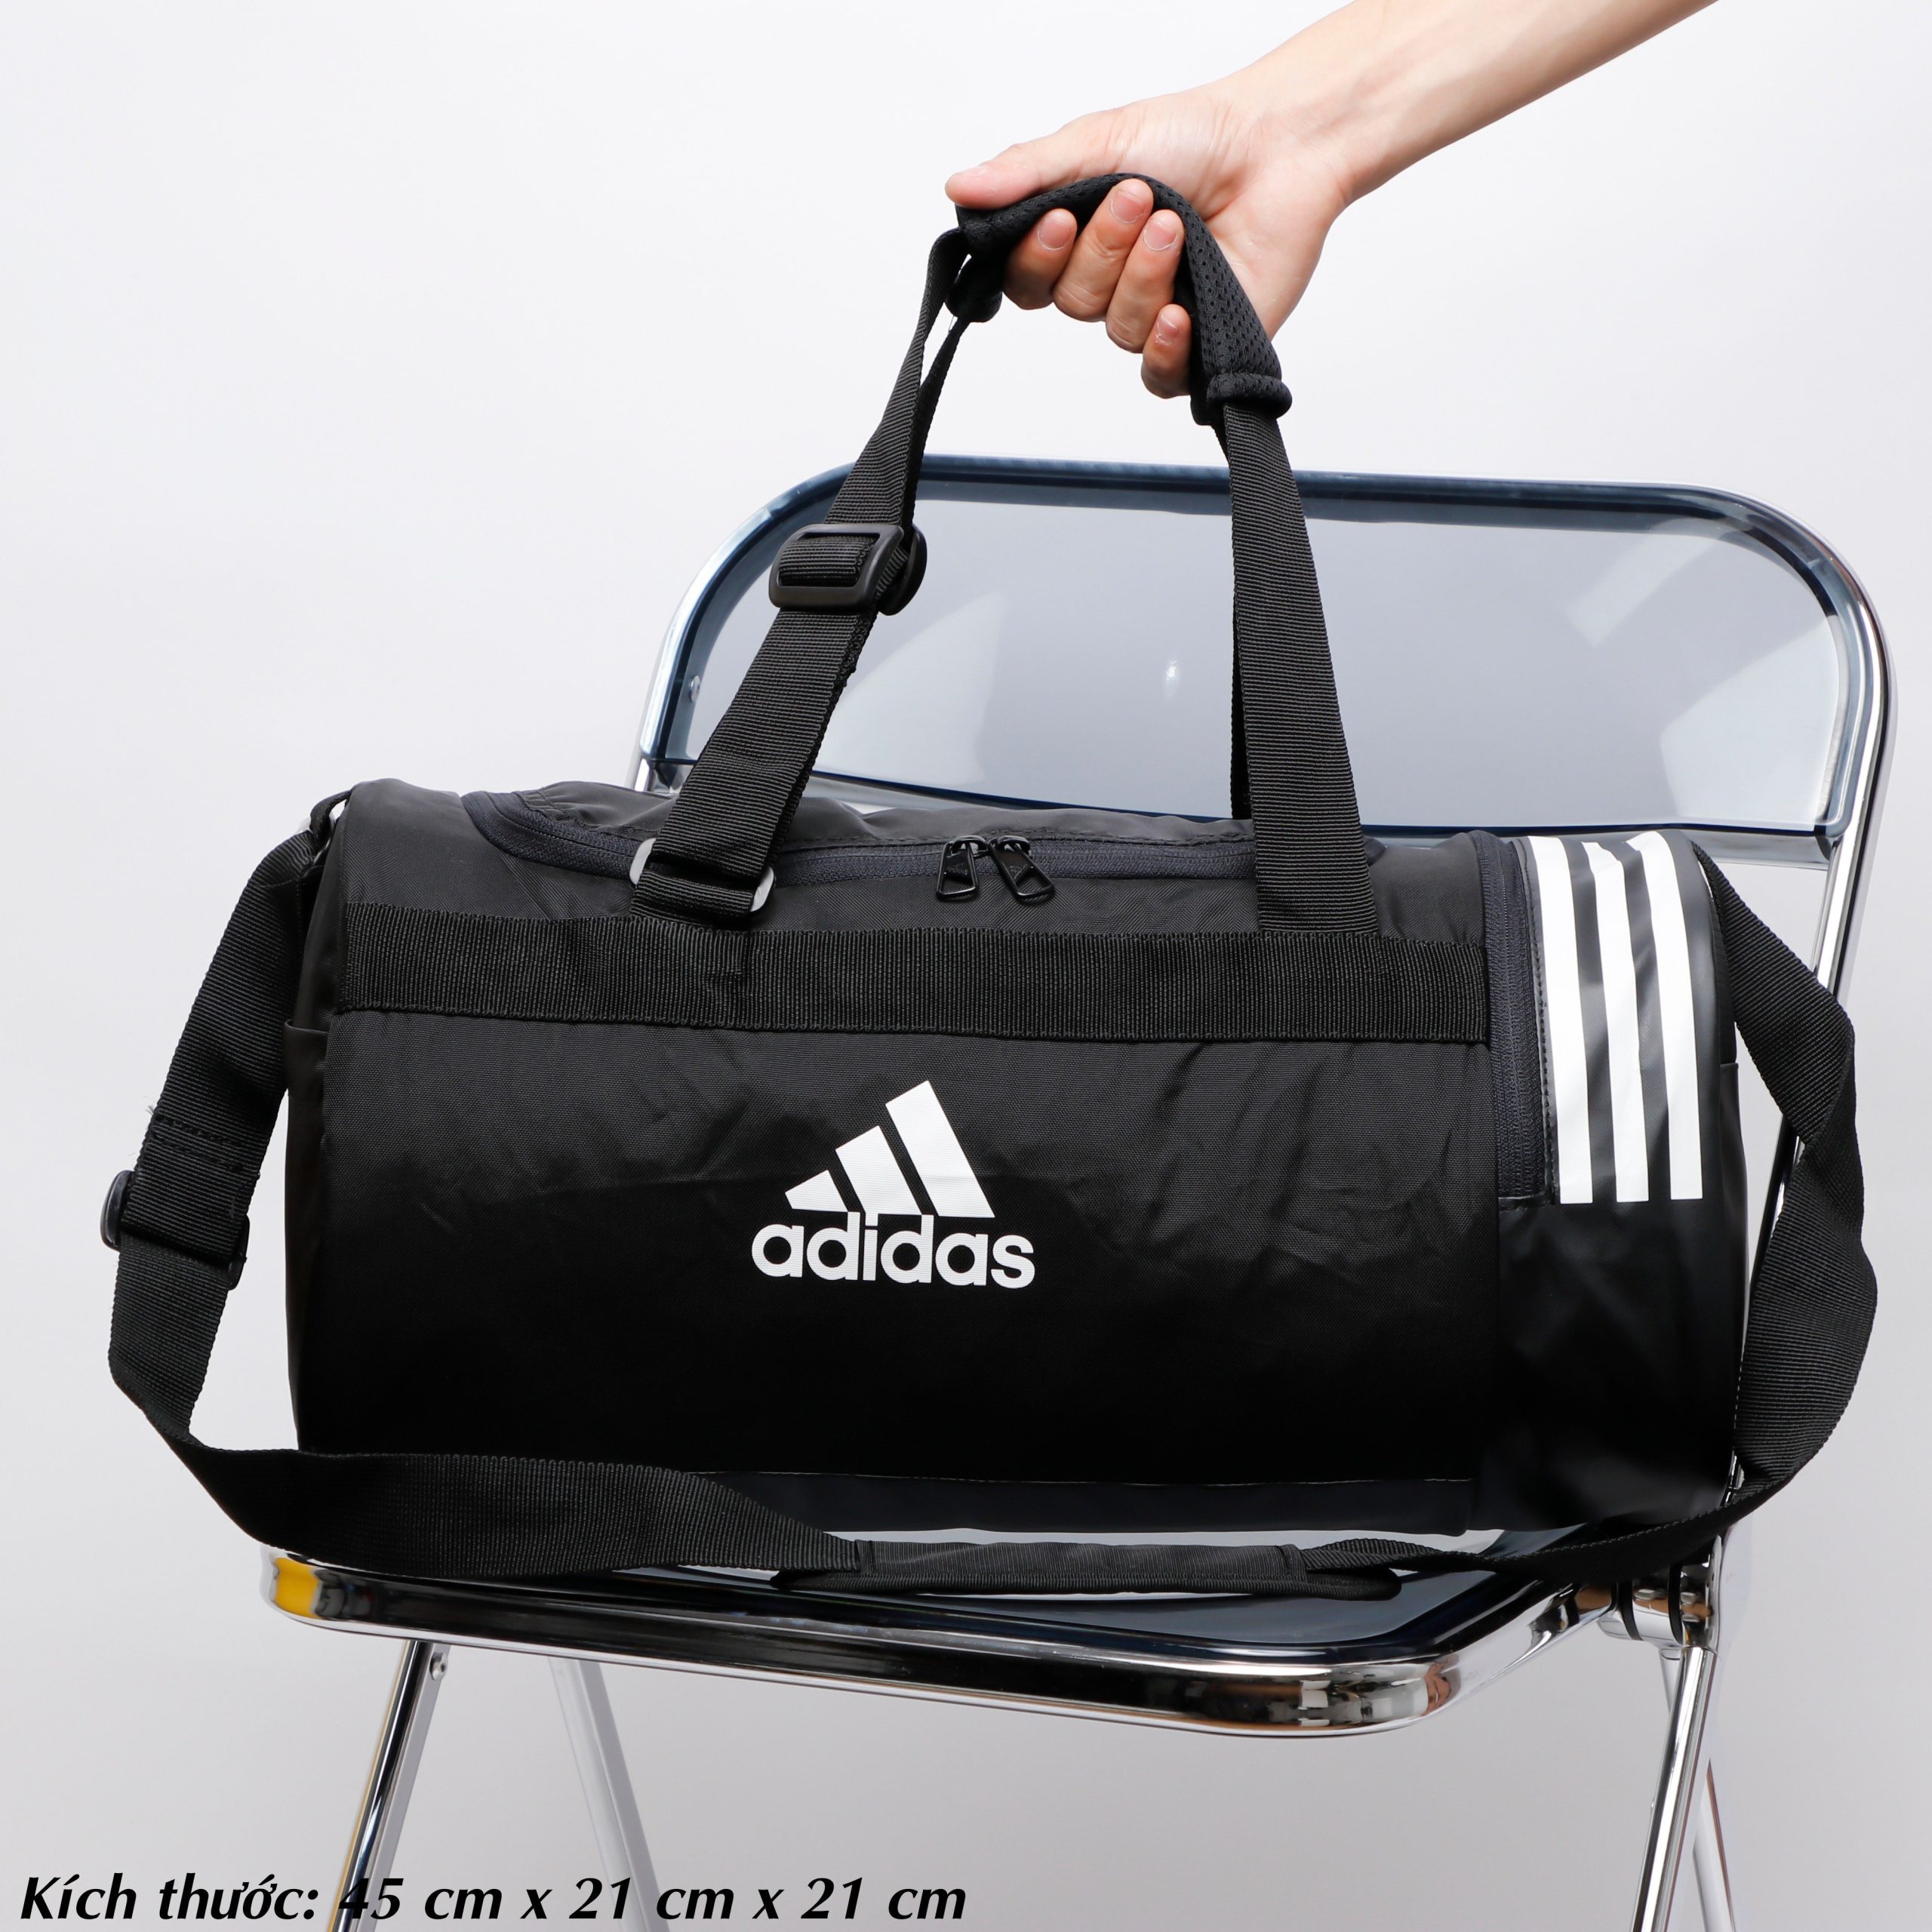 Adidas Polyester 19.5 Cms Duffle Bag(5146848-430-OS_ Shock Cyan Blue) :  Amazon.in: Bags, Wallets and Luggage